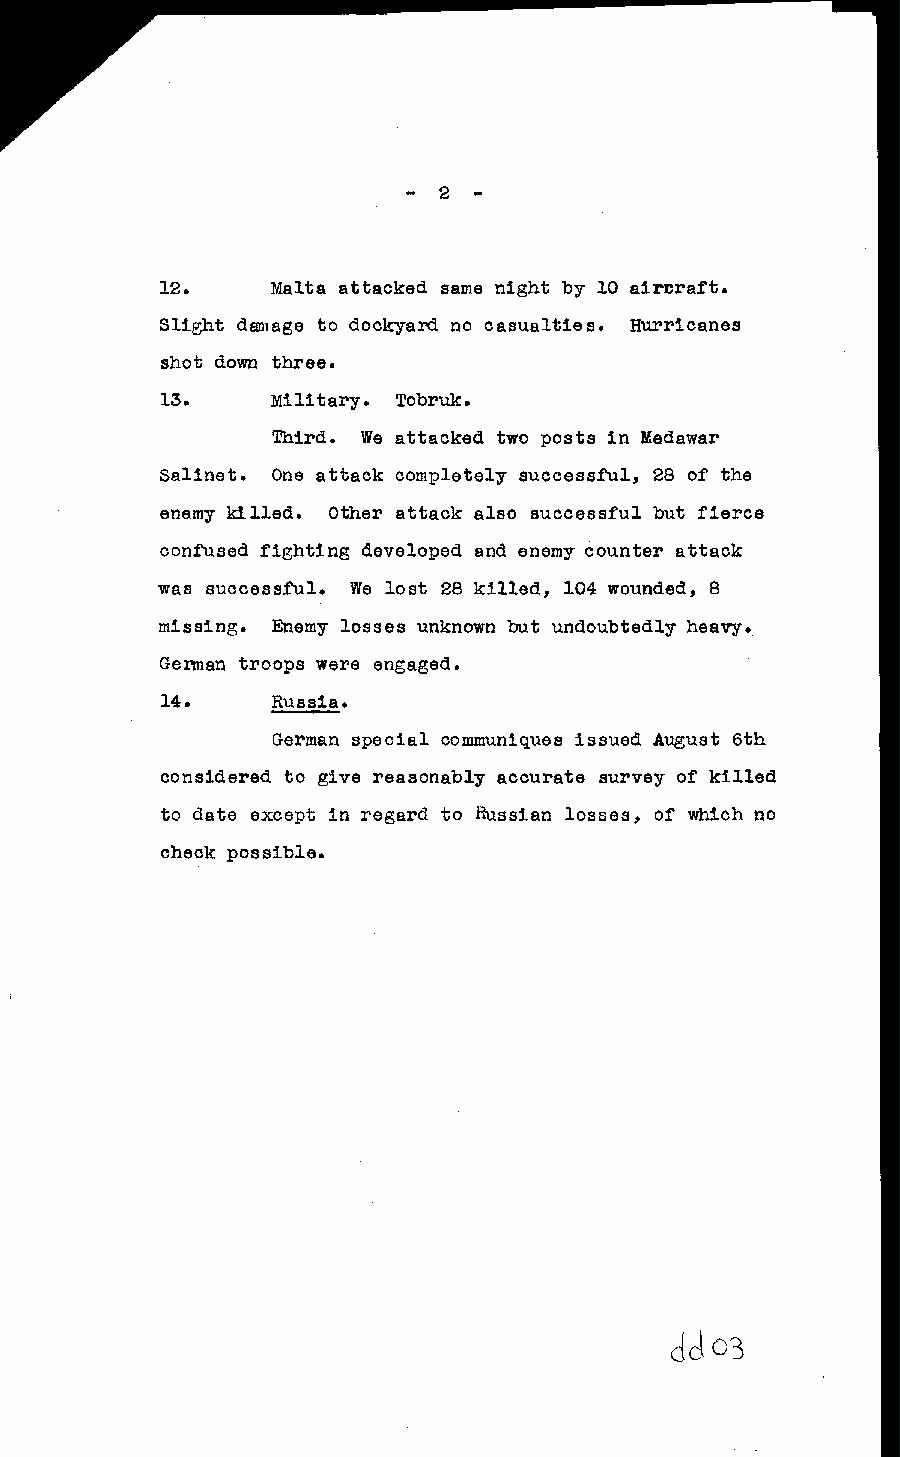 [a322dd03.jpg] - Cont-Report on military situation 8/7/41